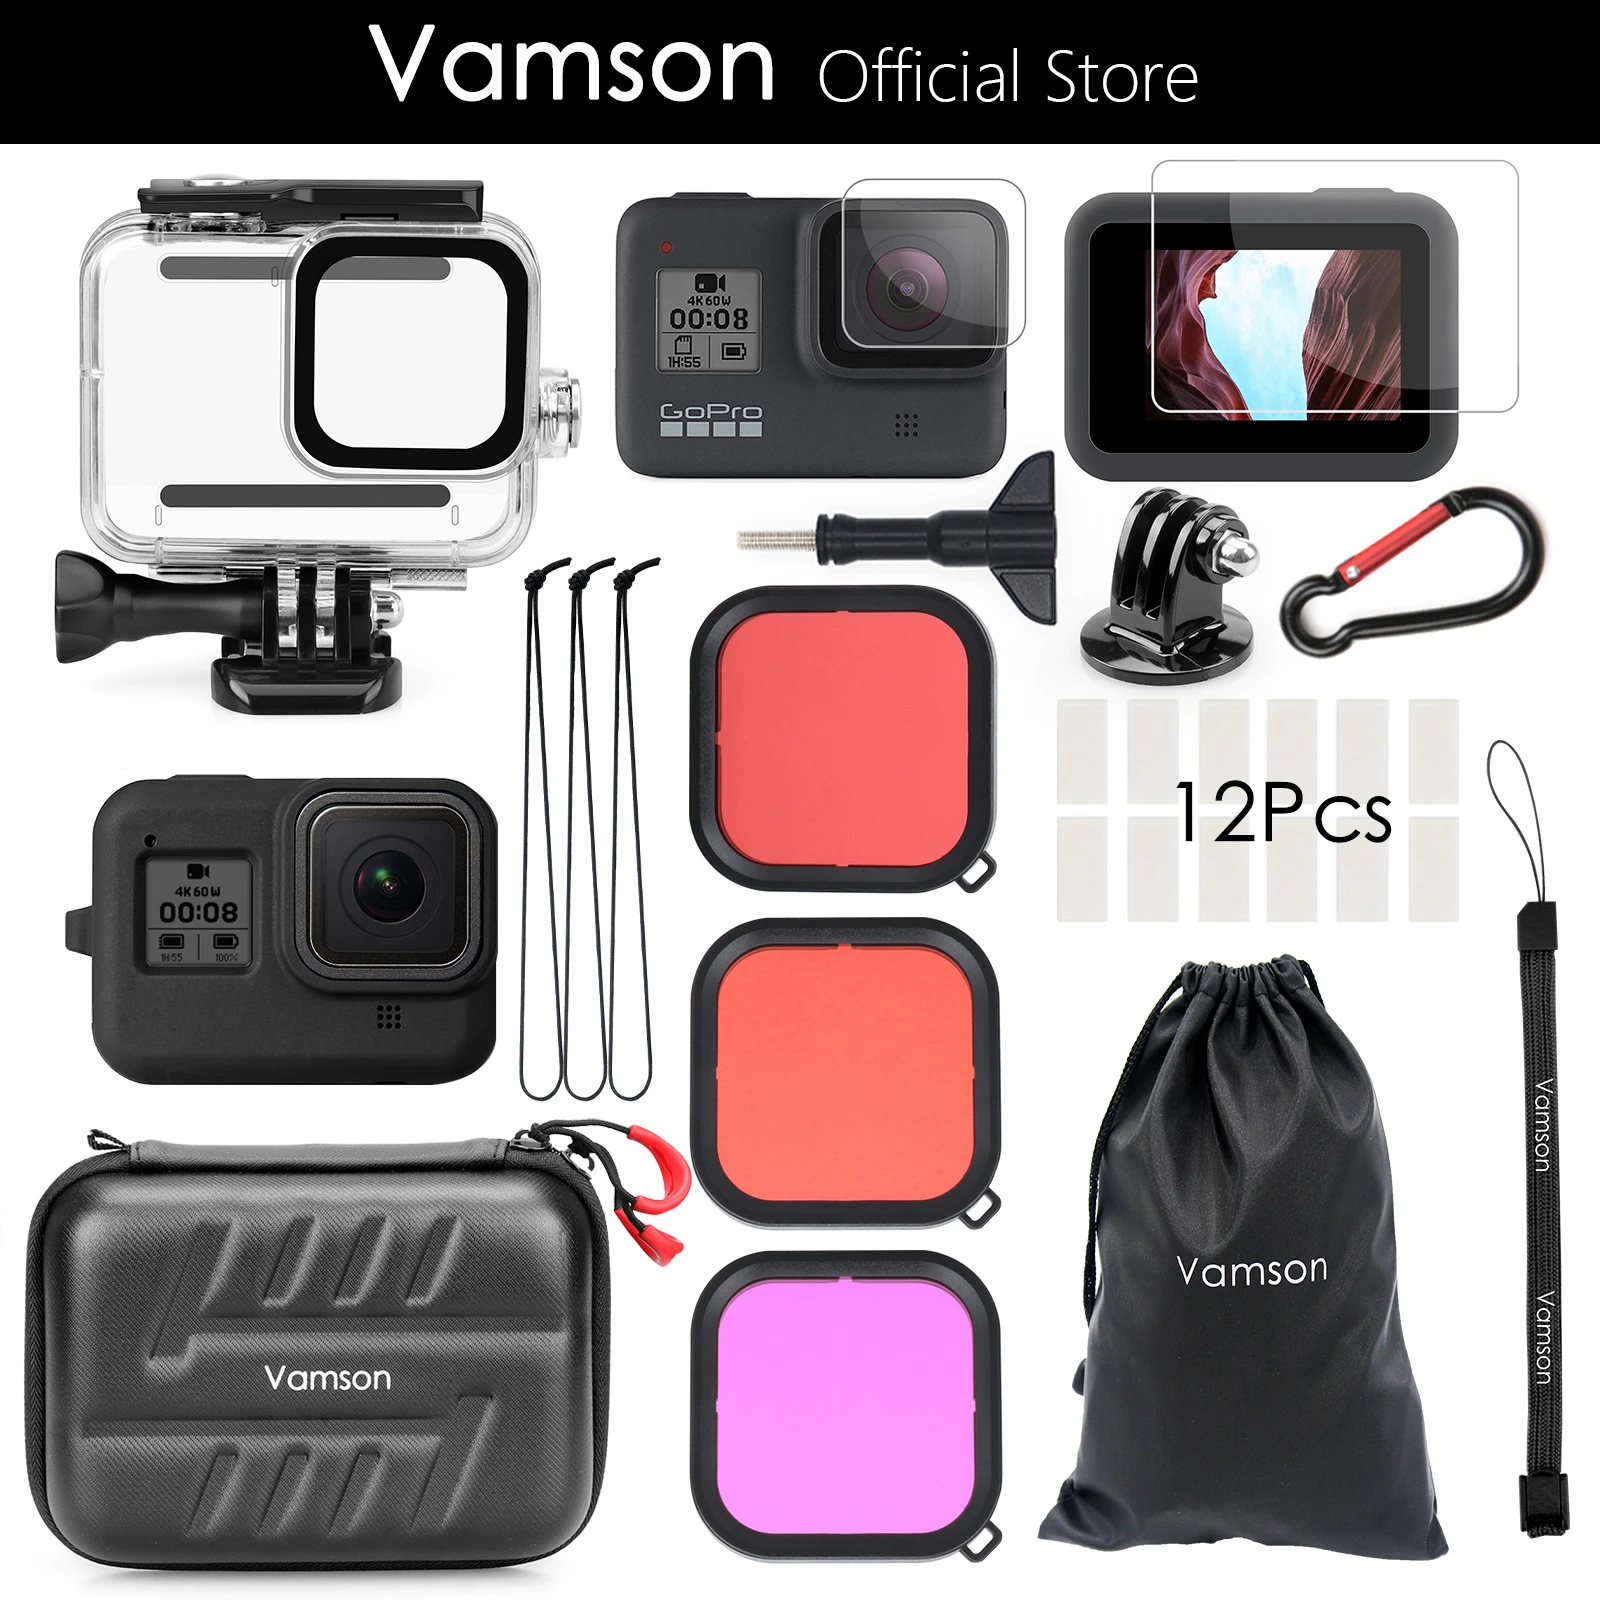 Vamson  for GoPro Hero 8 Black 45m Underwater Waterproof Case Diving Protective Cover Housing Mount for Go Pro 8 Accessory VP651